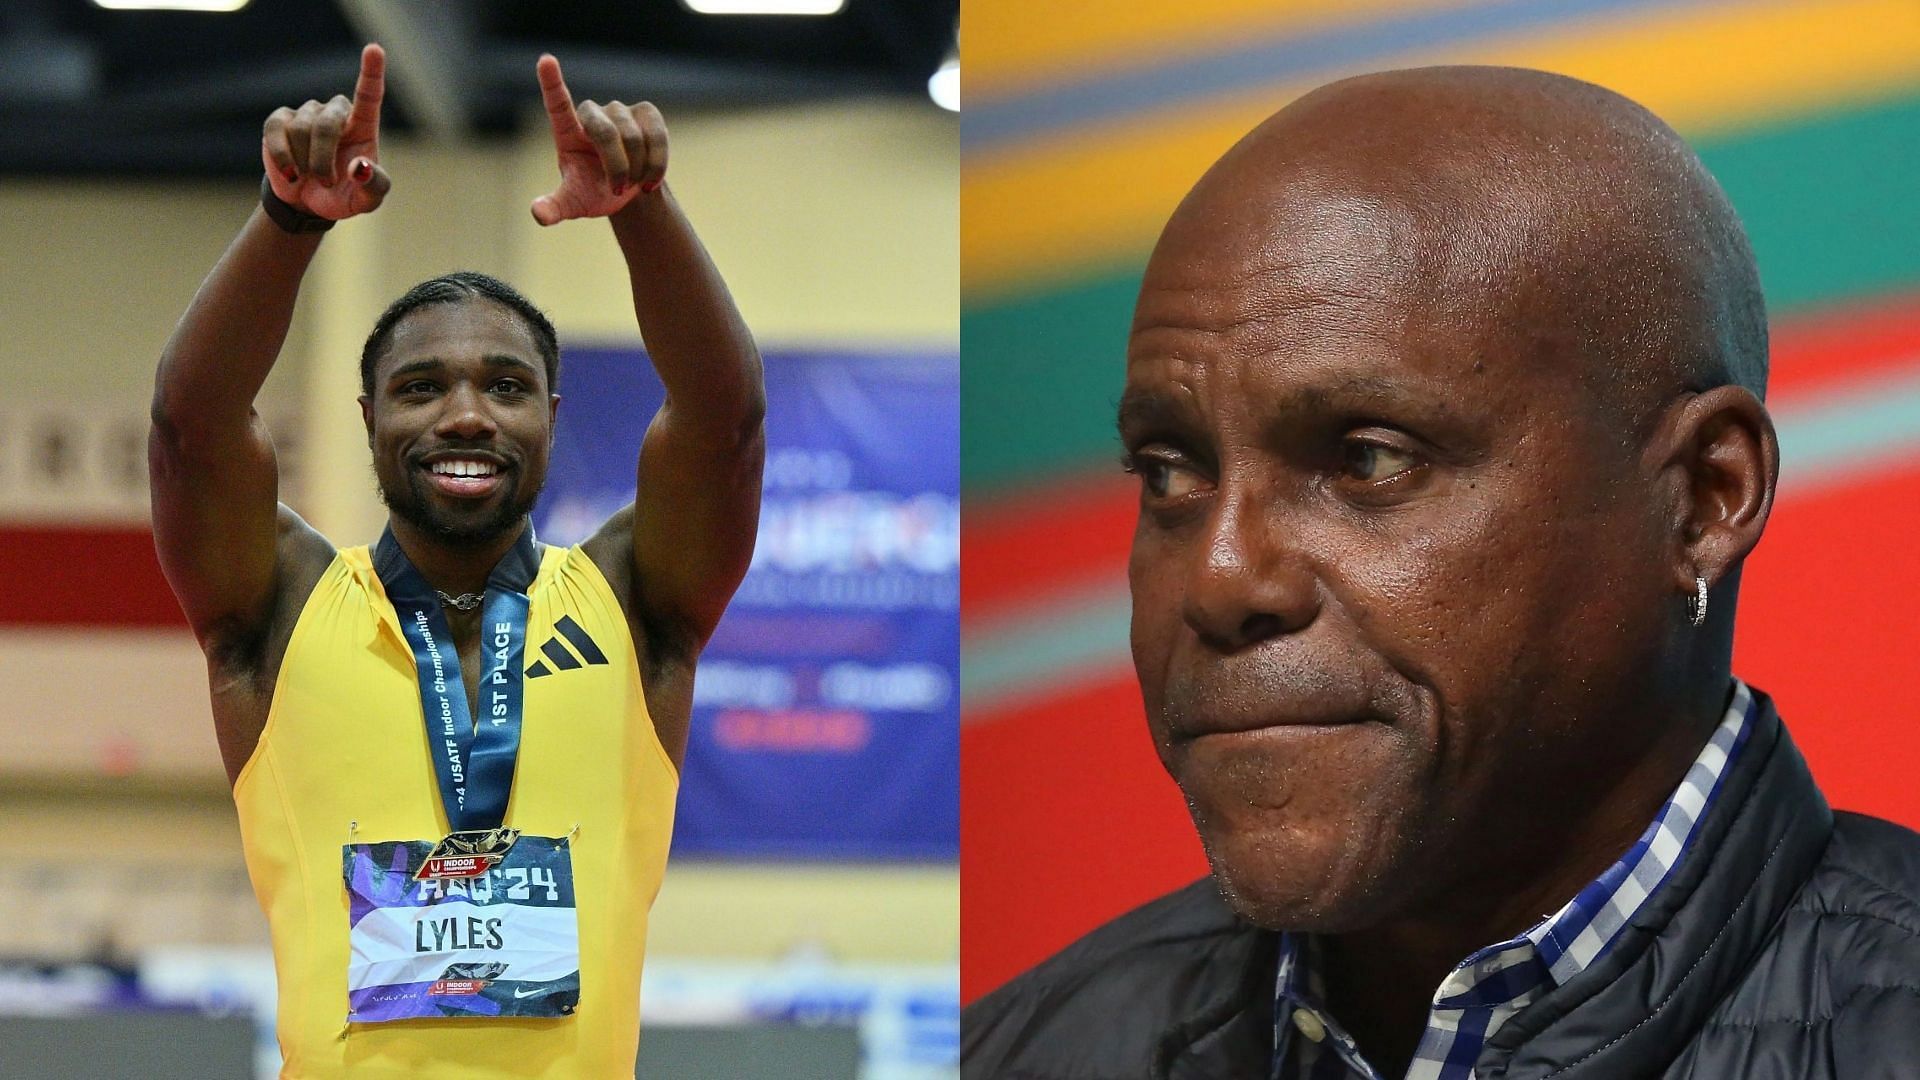 American athletic icons Noah Lyles and Carl Lewis